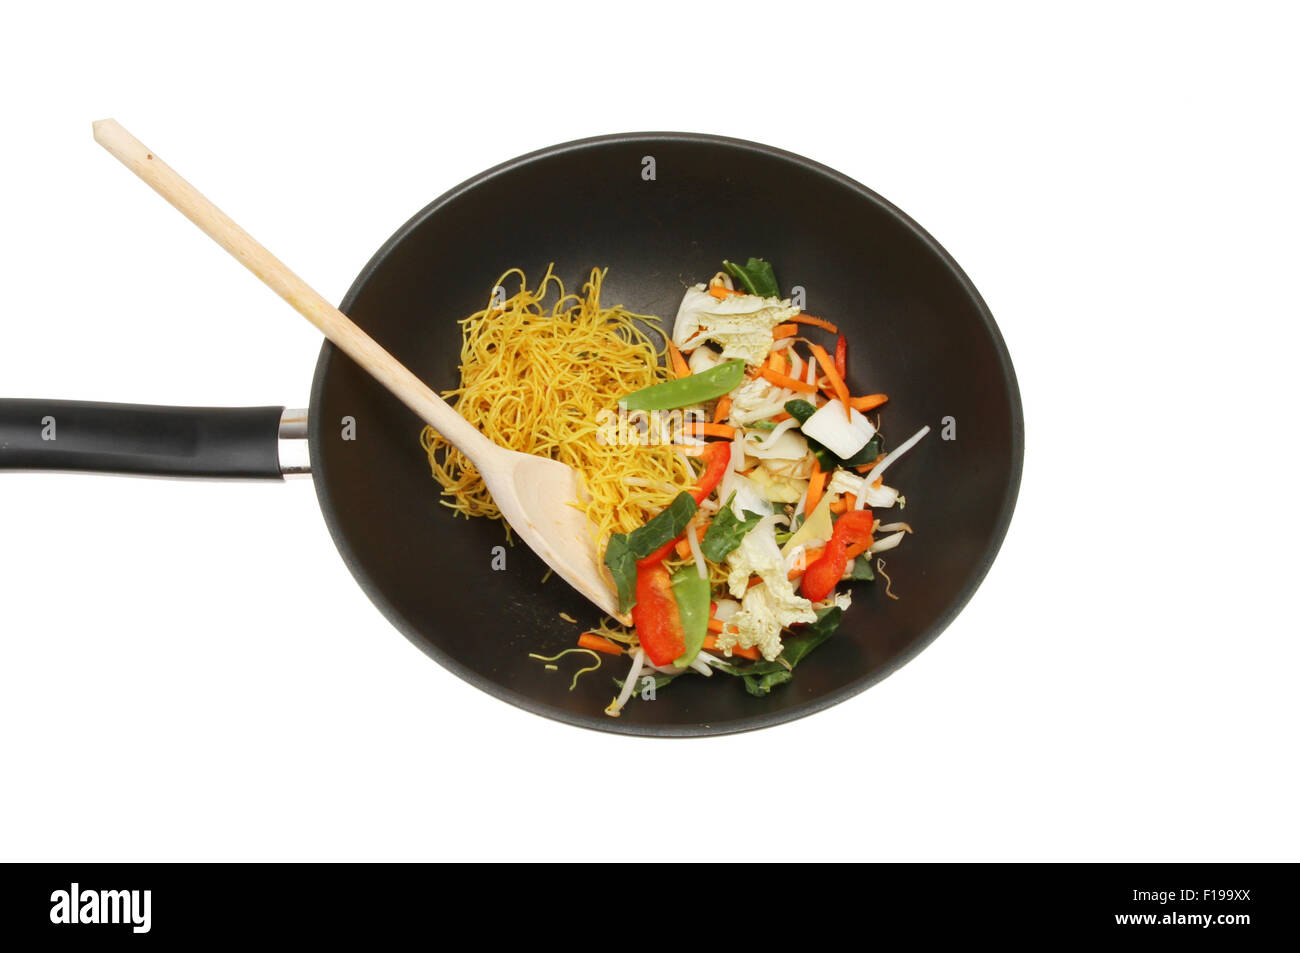 Stir fry ingredients with a wooden spoon in a wok isolated against white Stock Photo